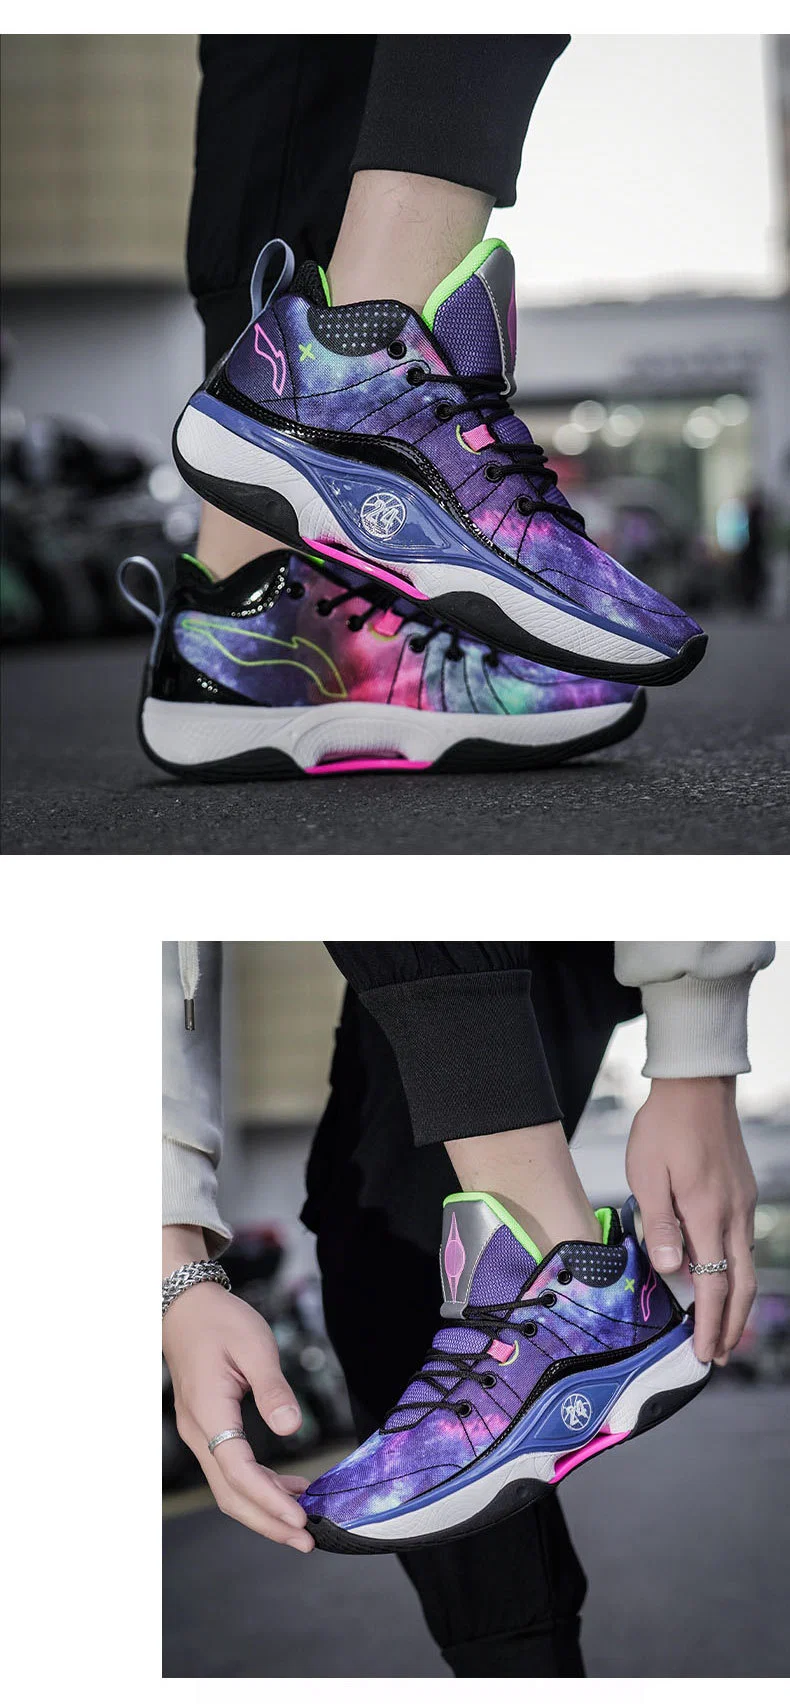 Winter New High Quality Basketball Shoes Carbon Plate Shock Absorption High Elastic Sports Shoes